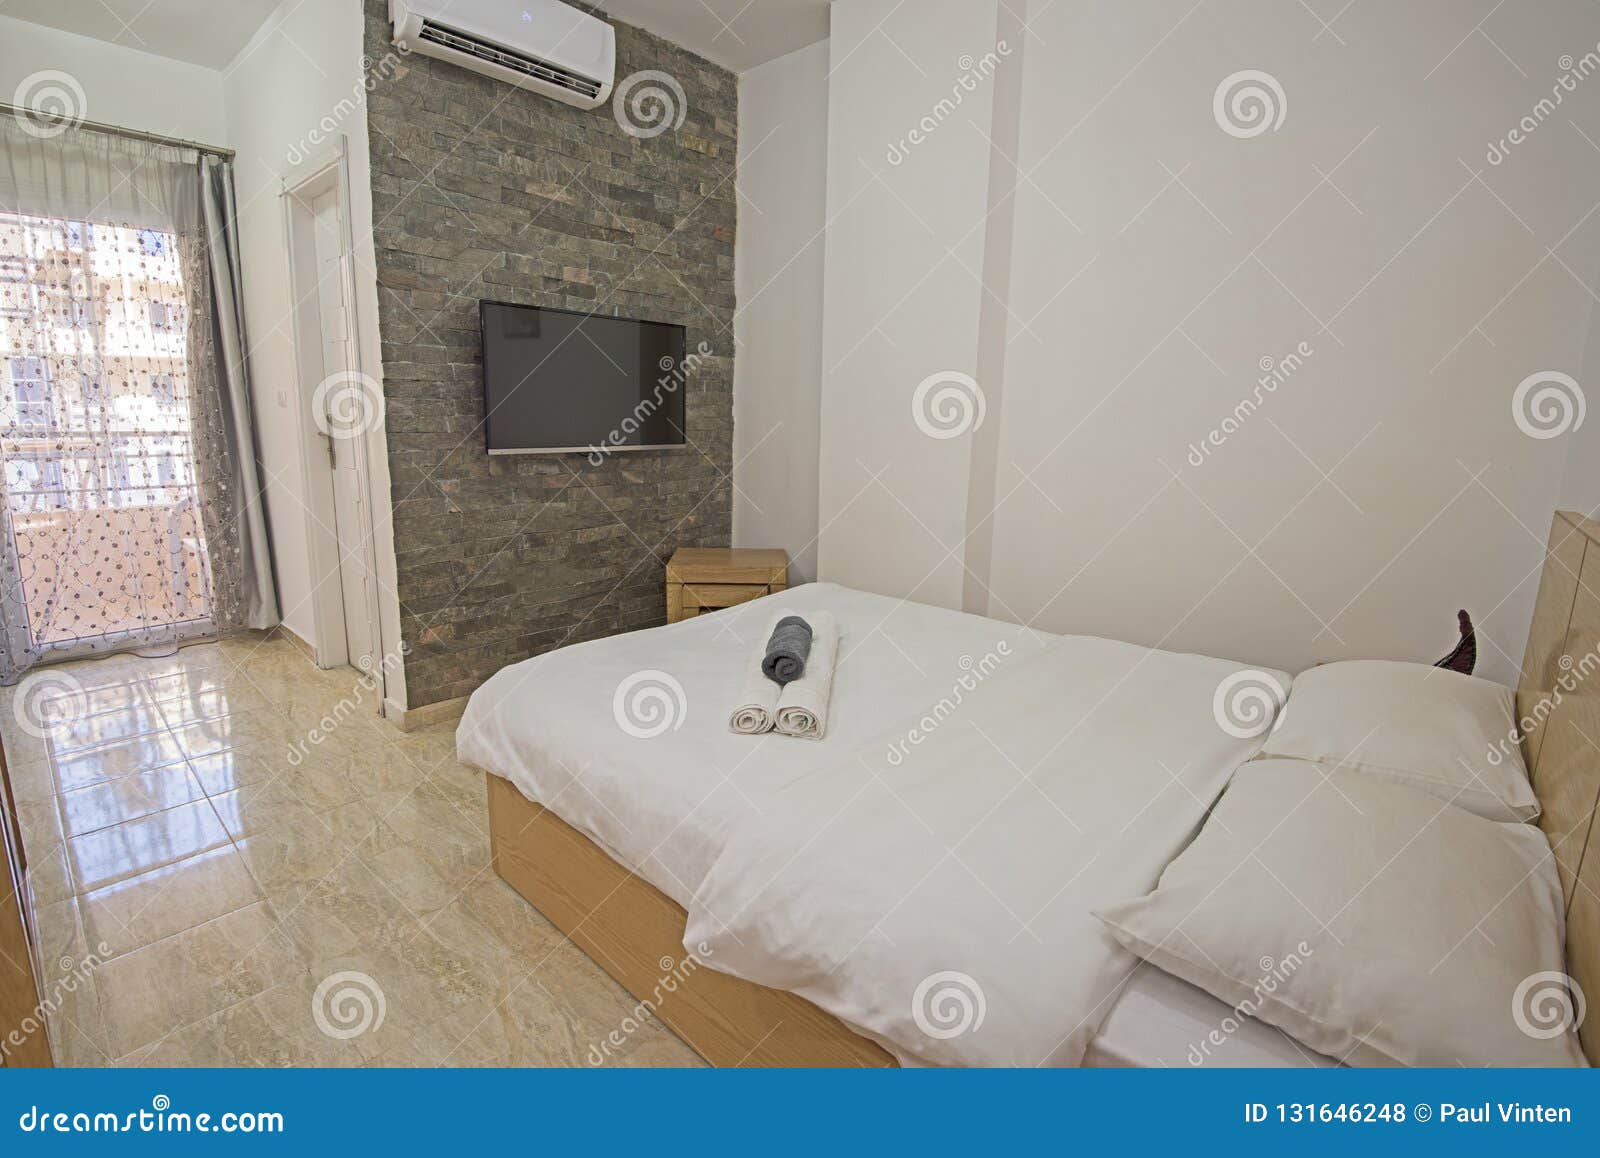 Interior design decor furnishing of luxury show home bedroom showing  furniture and double bed with futon style bed and mezzanine upper level  Stock Photo - Alamy